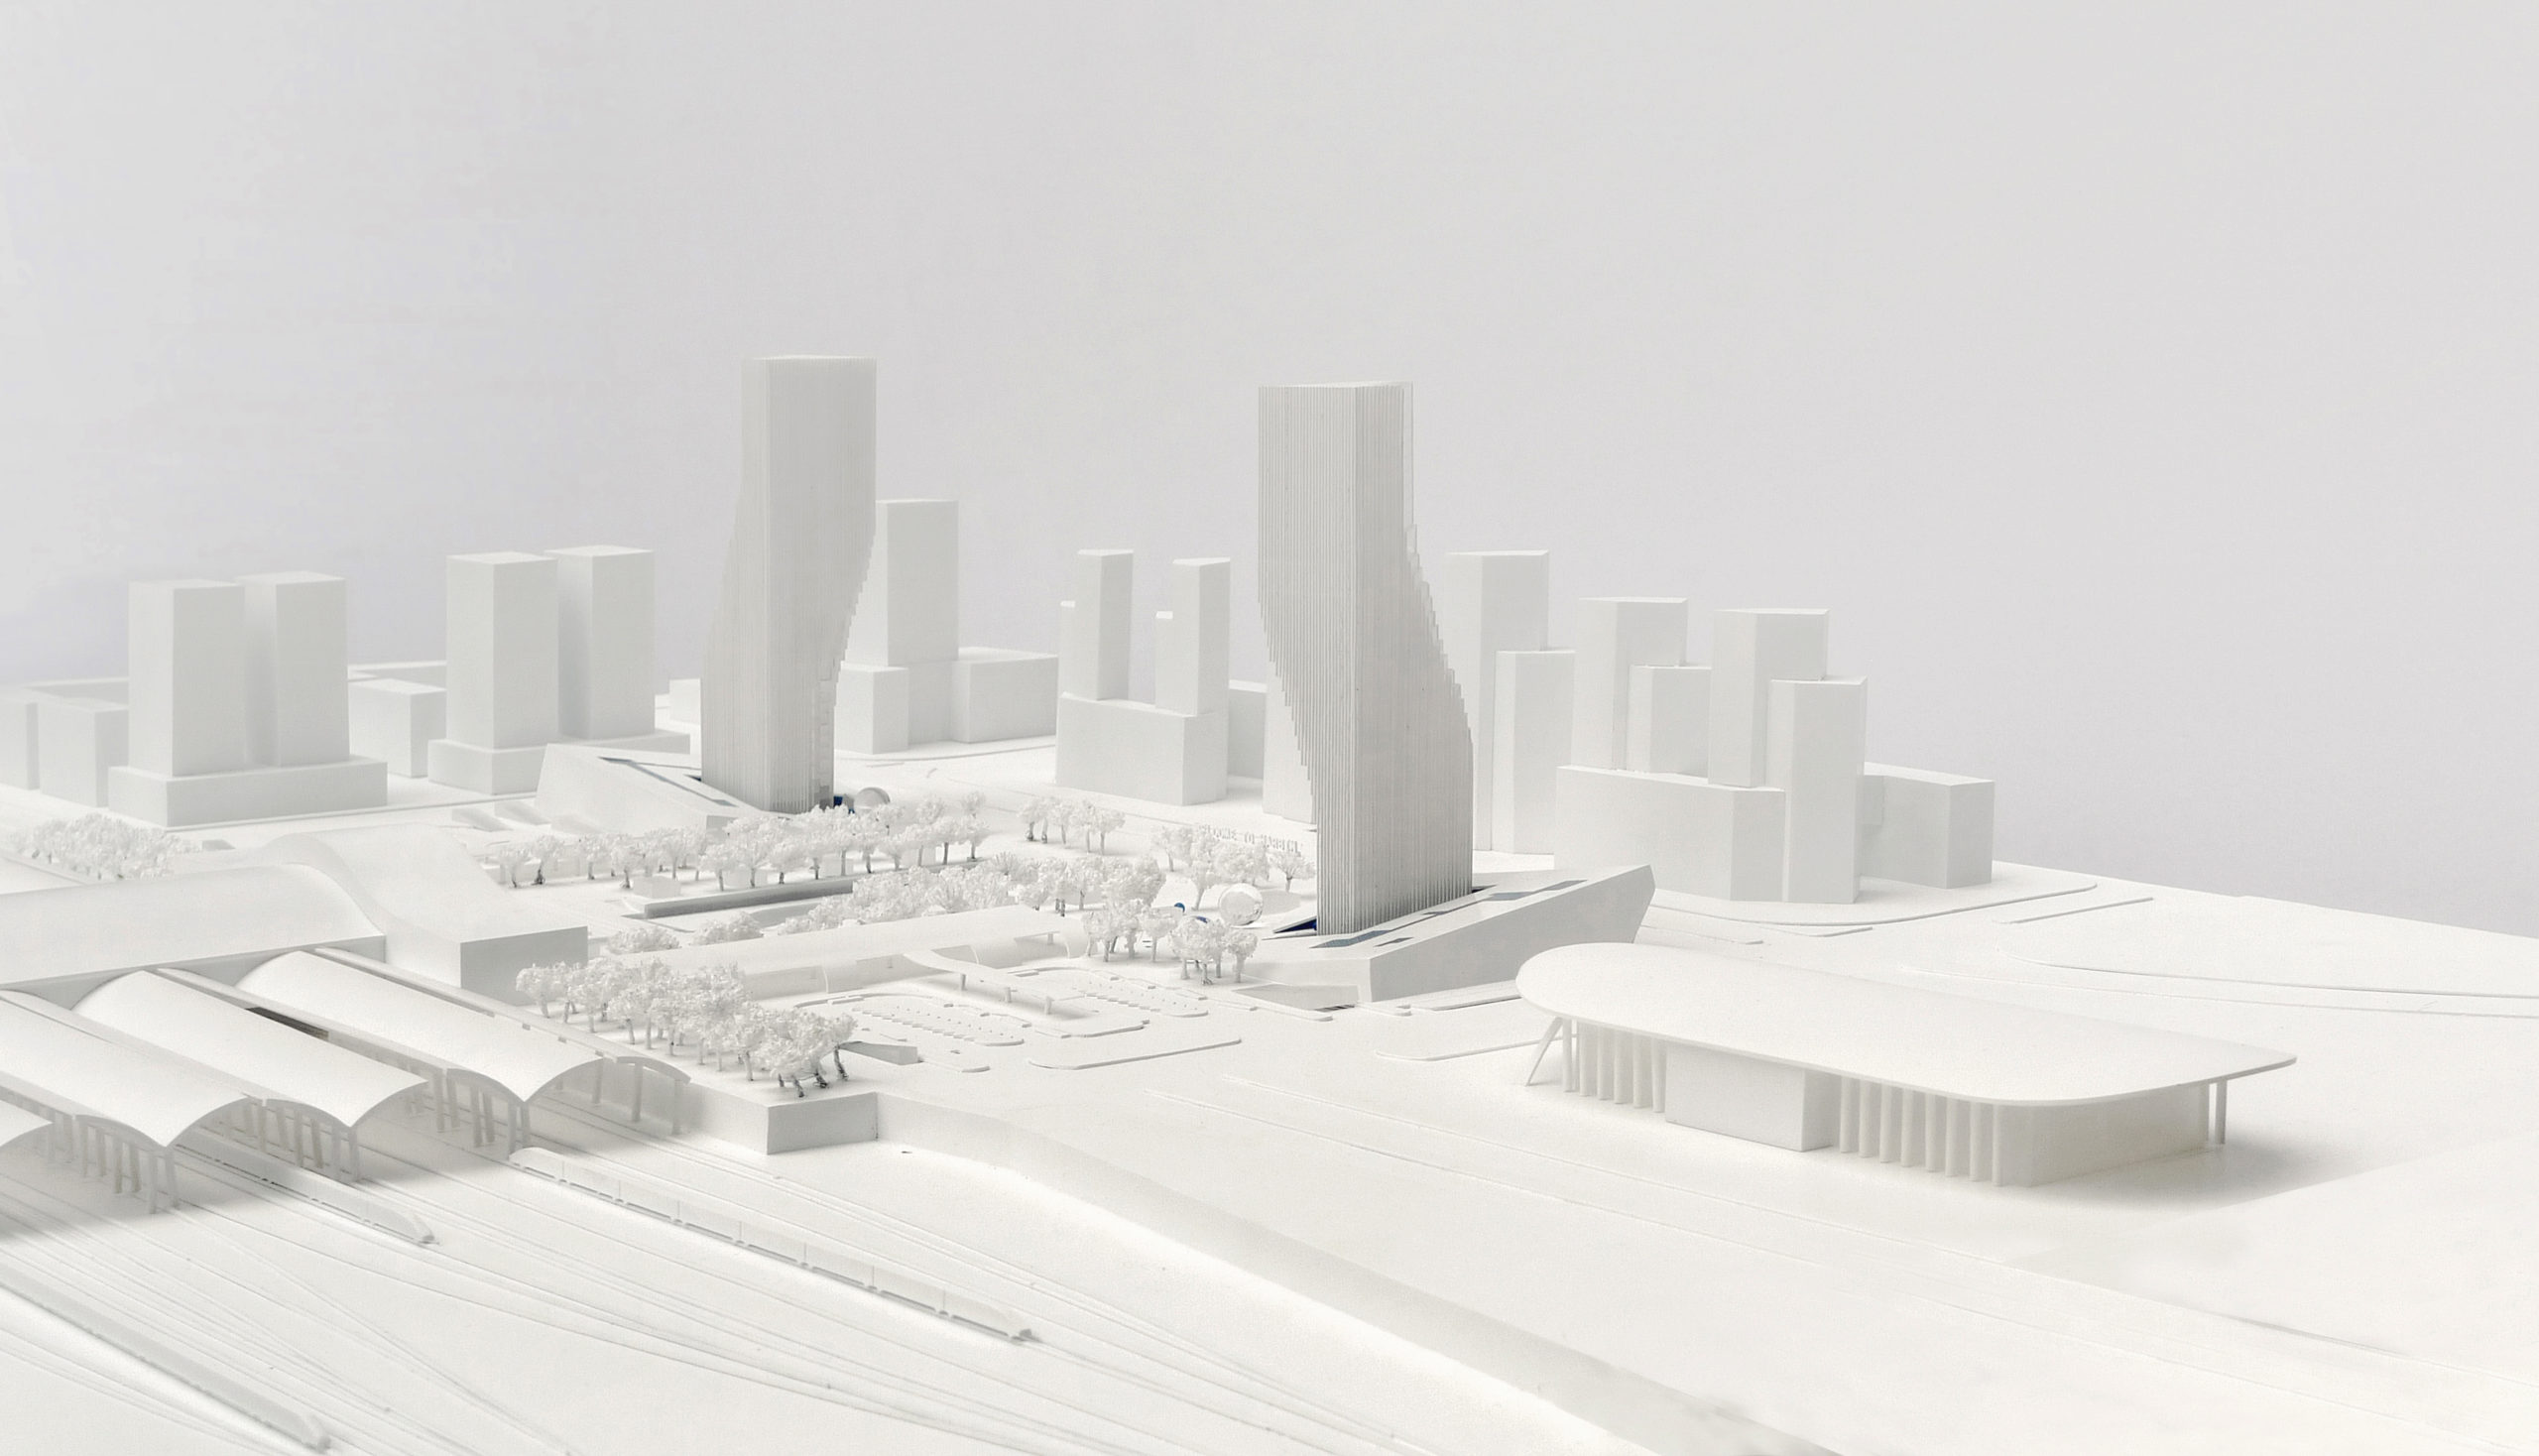 spatial practice architecture office Los Angeles Hong Kong harbin twin towers harbin china model snow